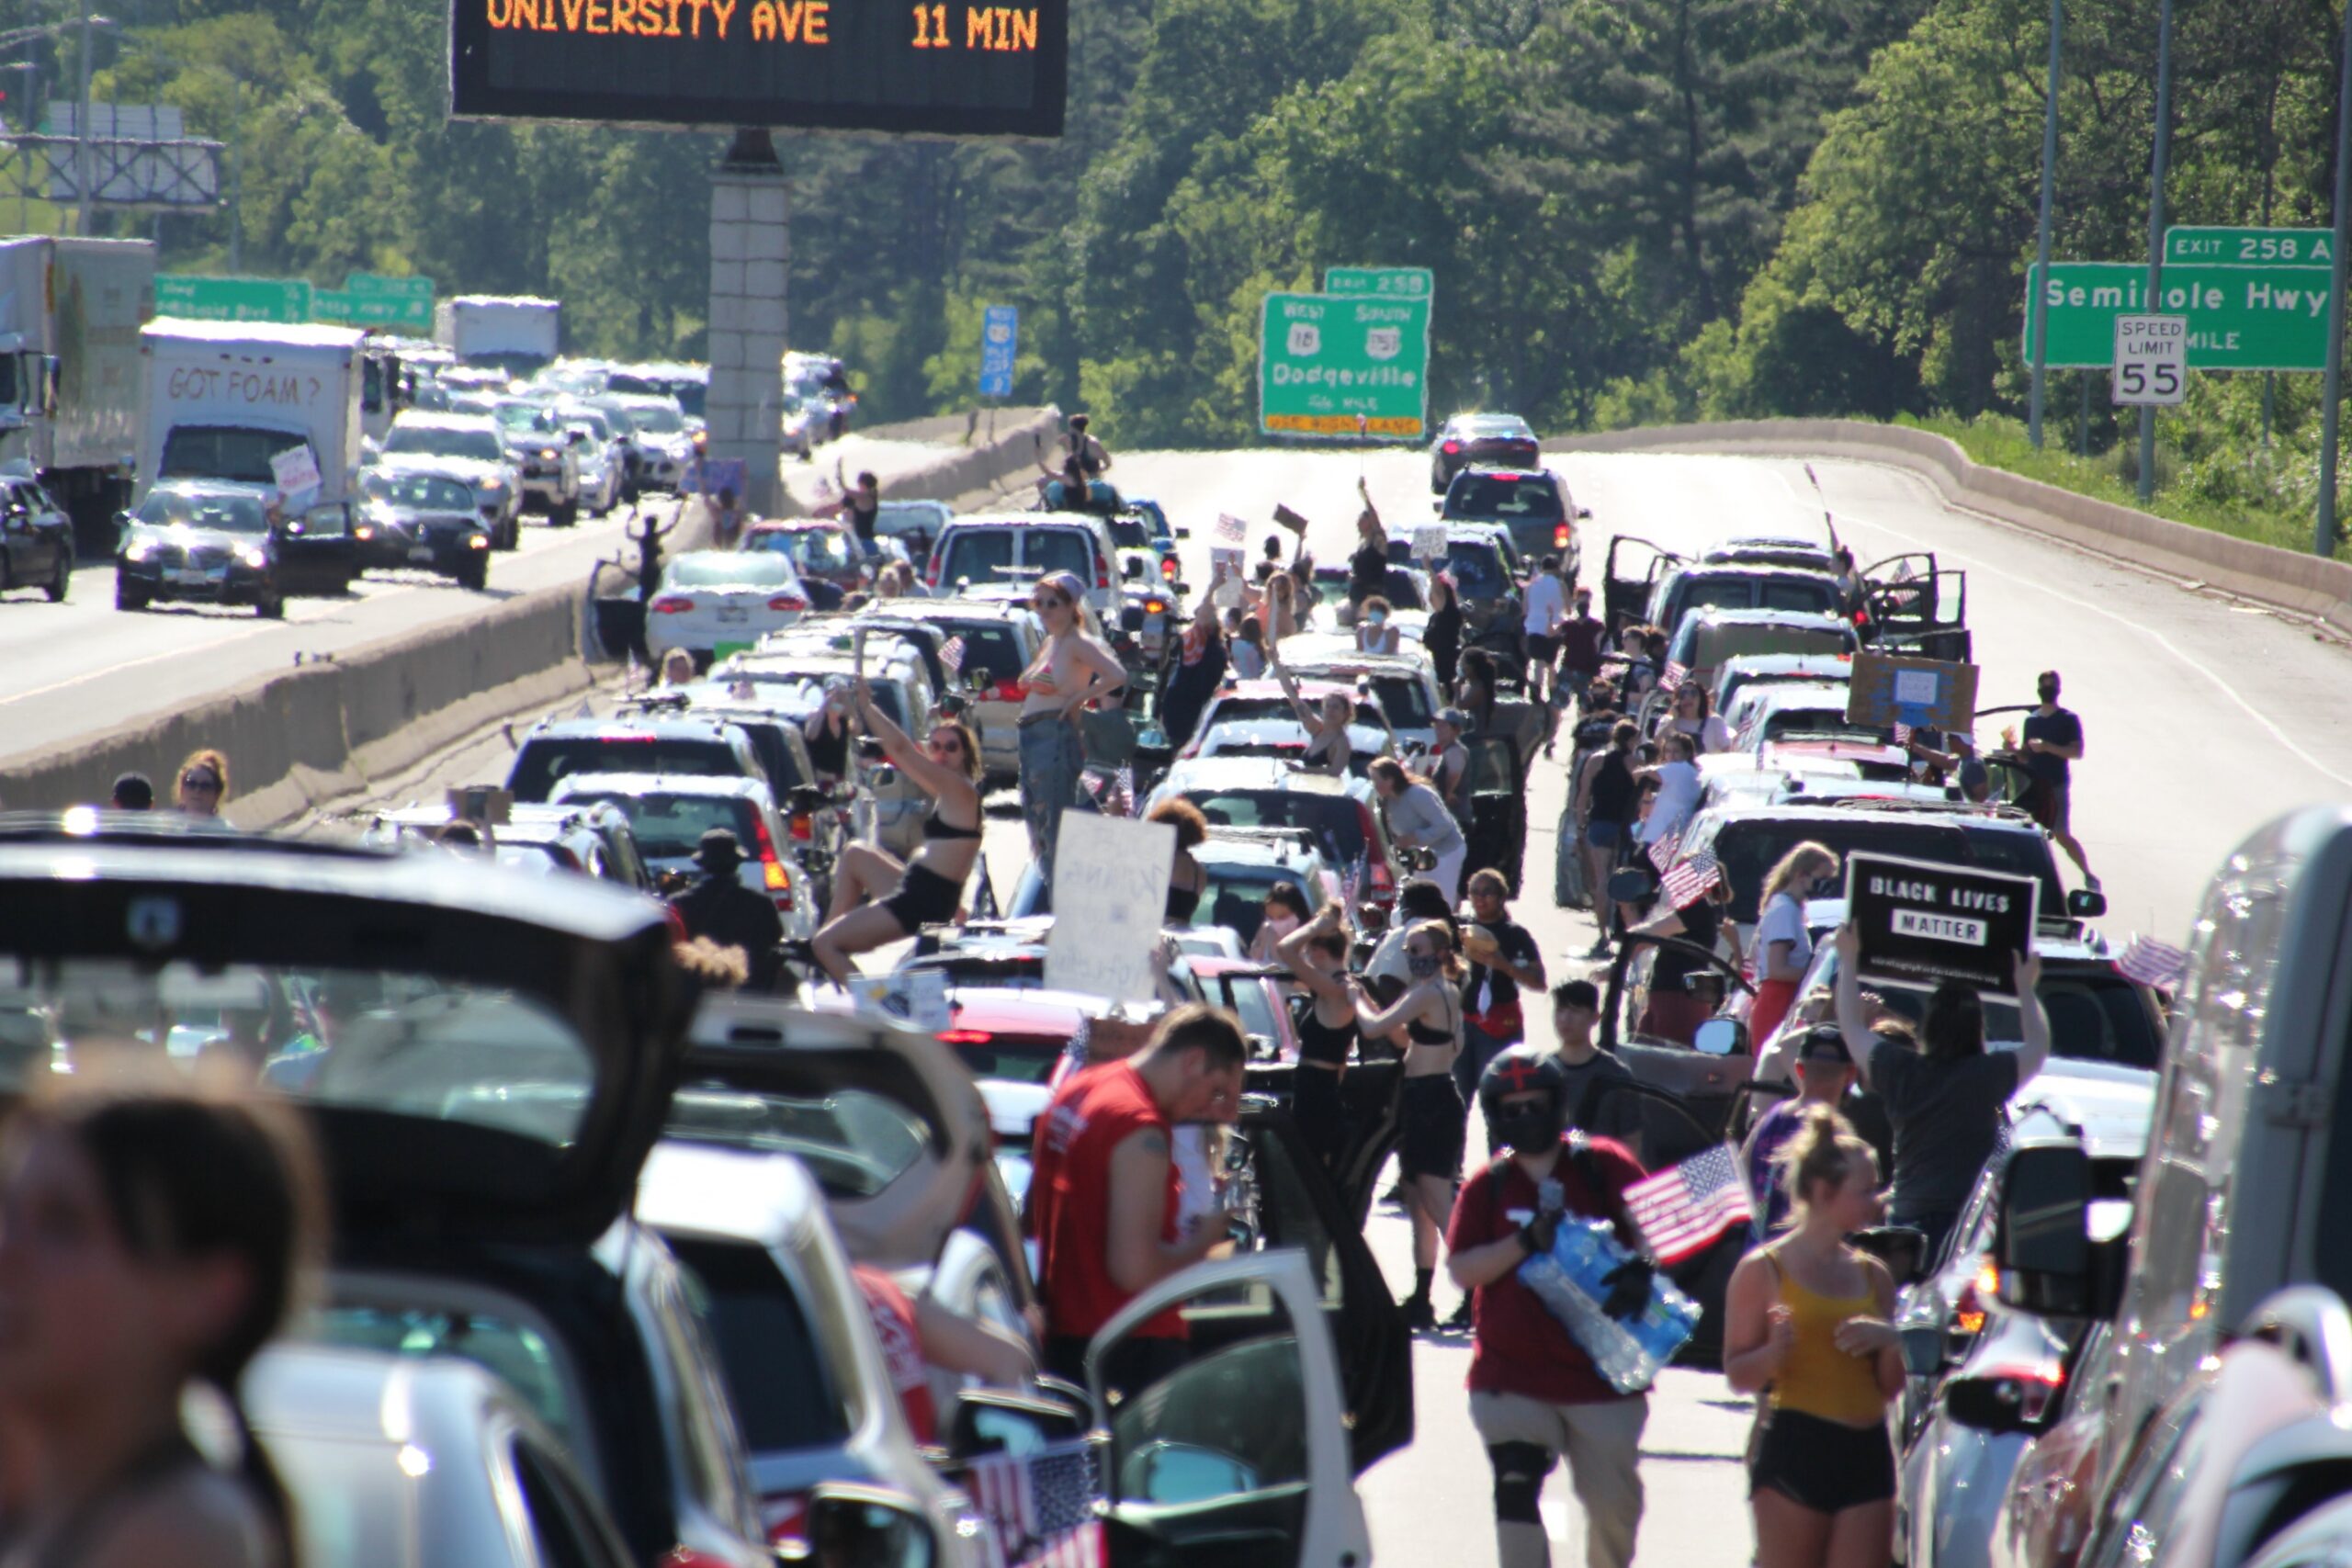 Traffic slowed to a standstill on the Beltline in Madison on Thursday, June 4 thanks to a car caravan protesting the killing of George Floyd